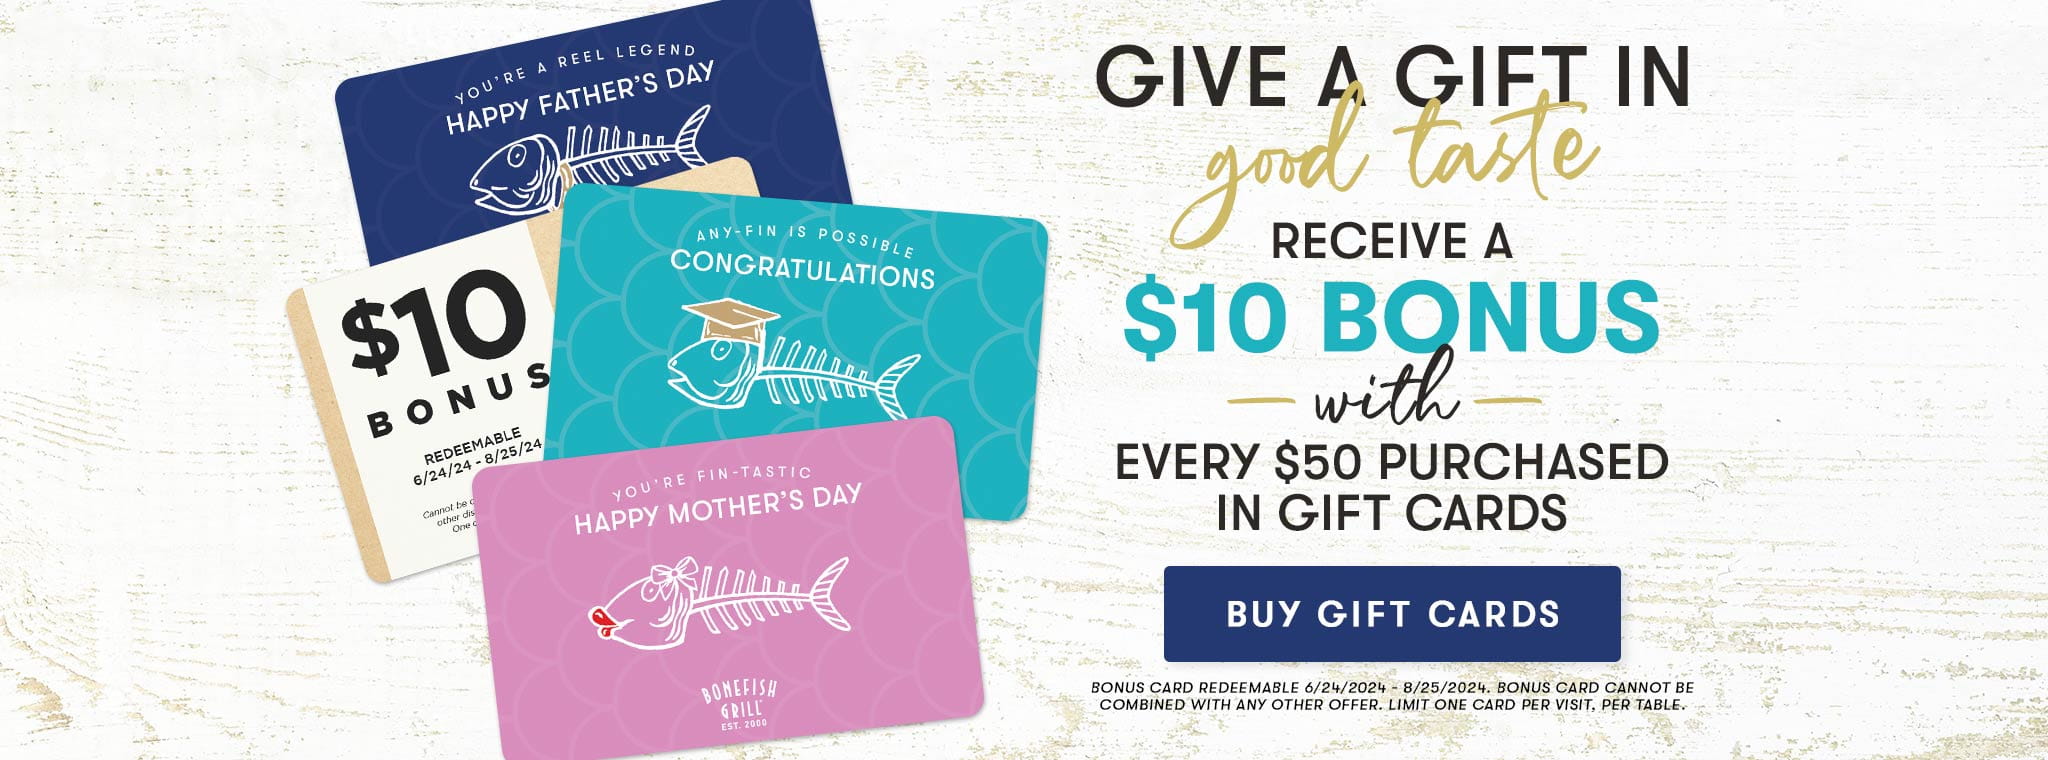 Give a Gift in Good Taste - Receive a $10 bonus with every $50 purchased in gift cards